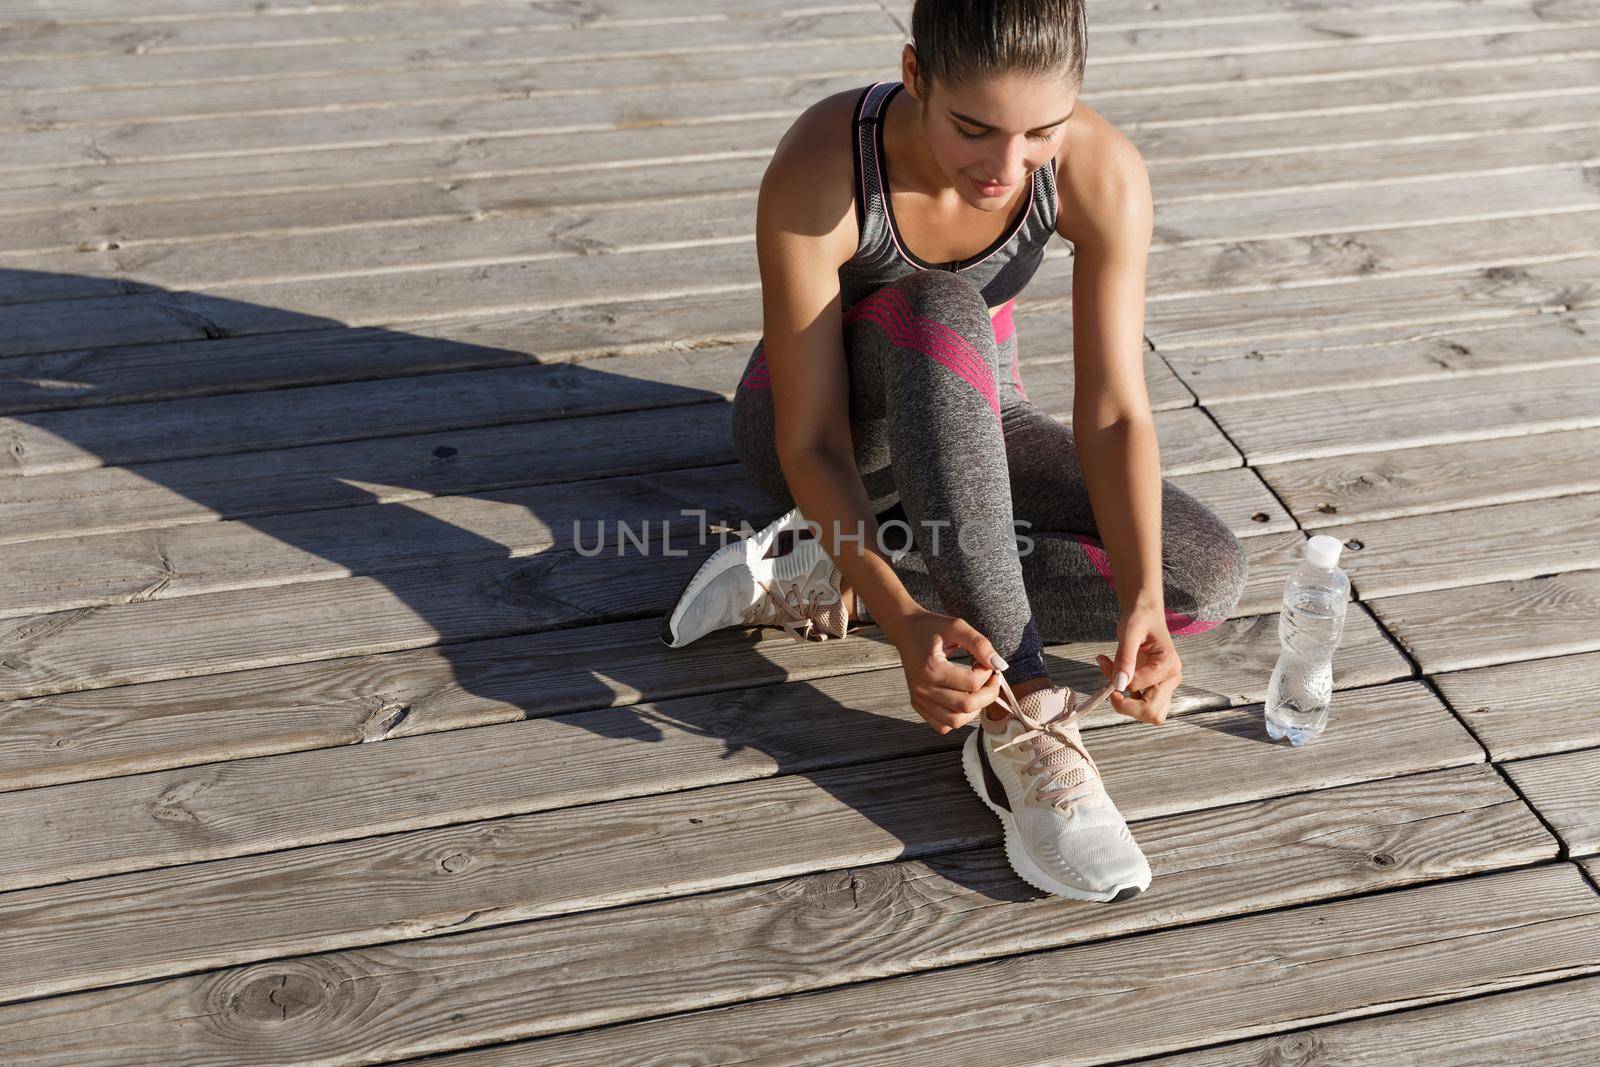 Outdoor shot of young fitness woman tying shoelaces and drinking water during workout.